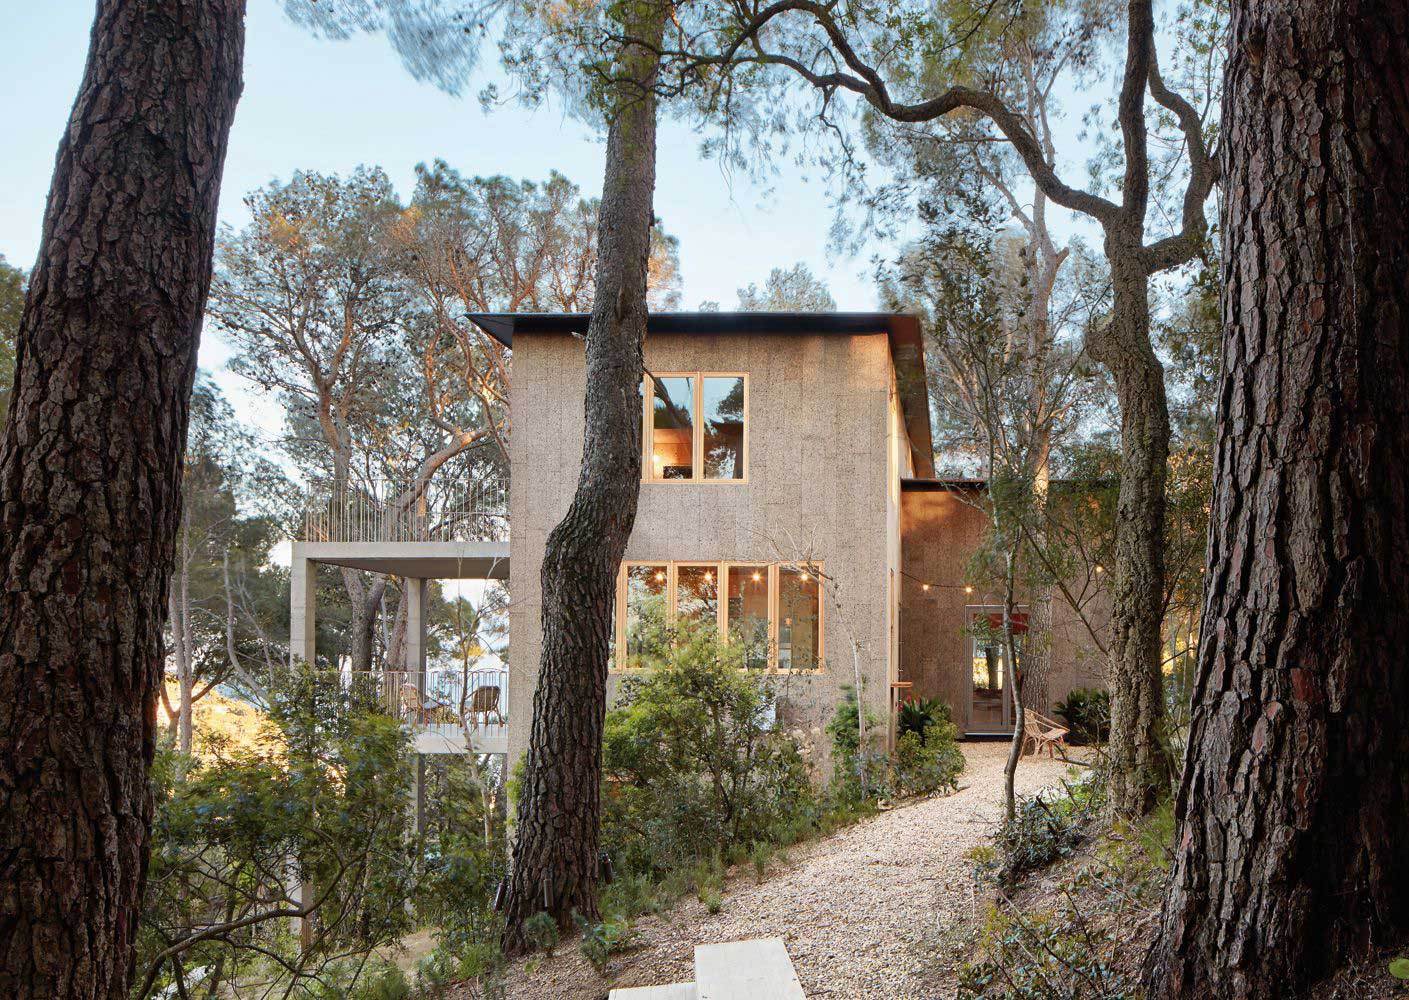 Two-Cork-Houses-Palafrugell-Costa-Brava-by-Lopez-Rivera-Architects-Yellowtrace-19